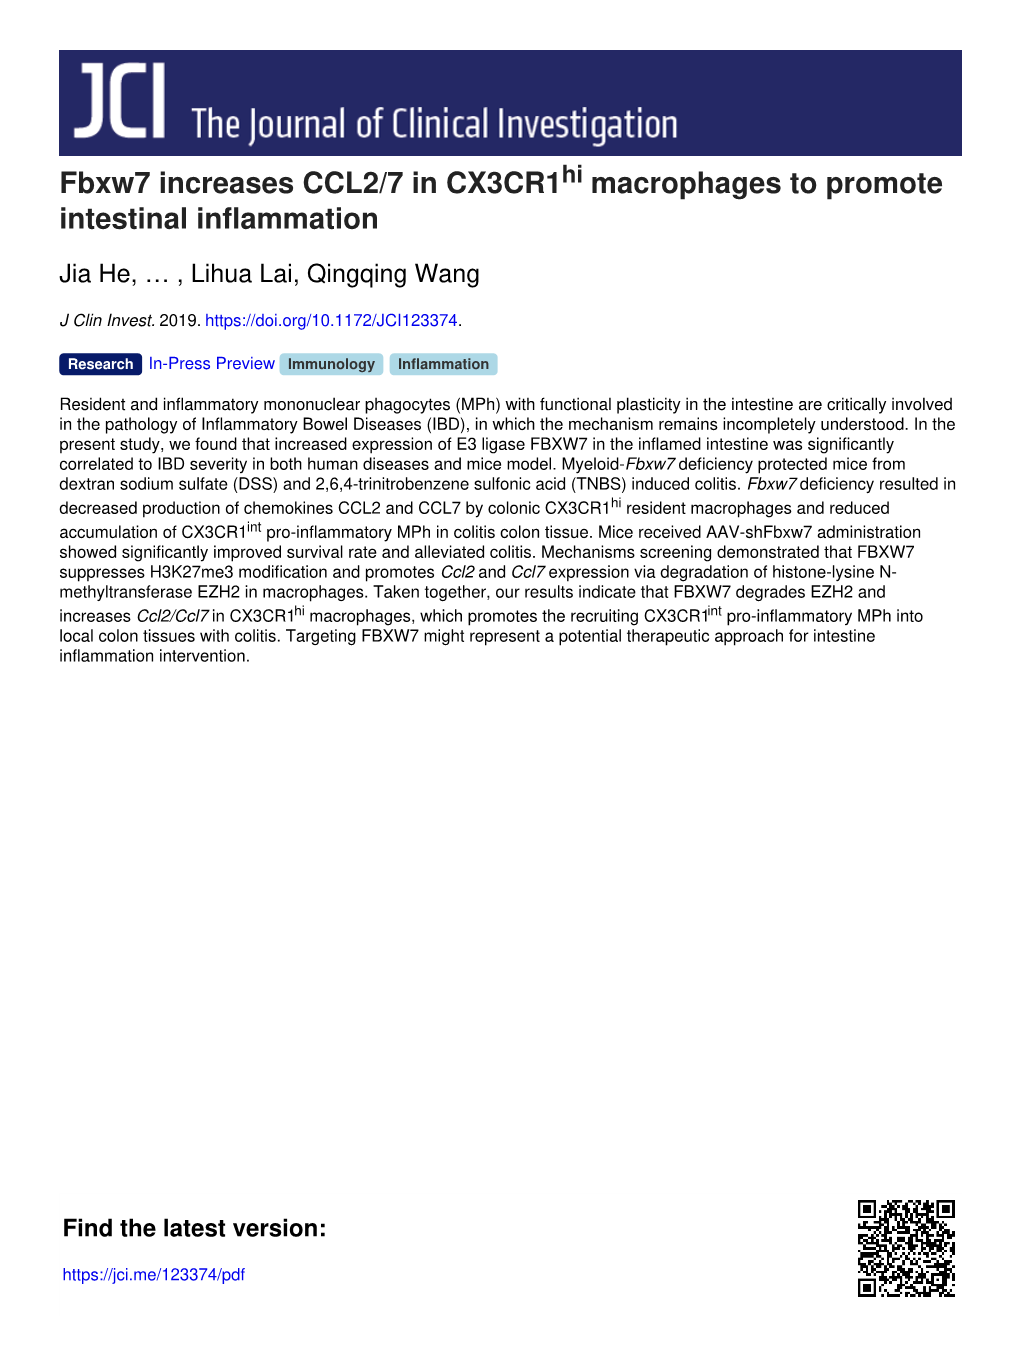 Fbxw7 Increases CCL2/7 in CX3CR1 Macrophages to Promote Intestinal Inflammation